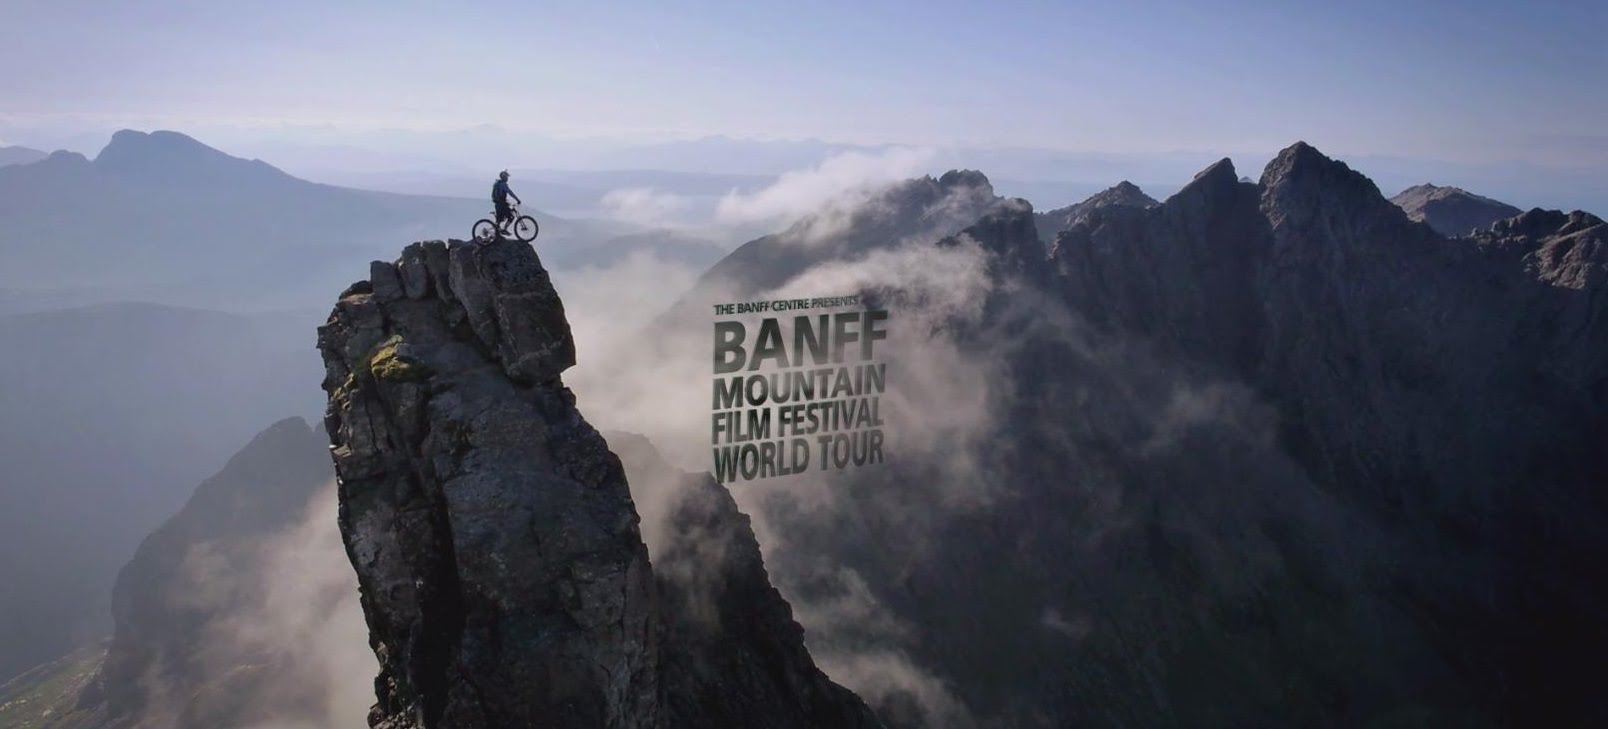 Banff Mountain Film Festival comes to Mission